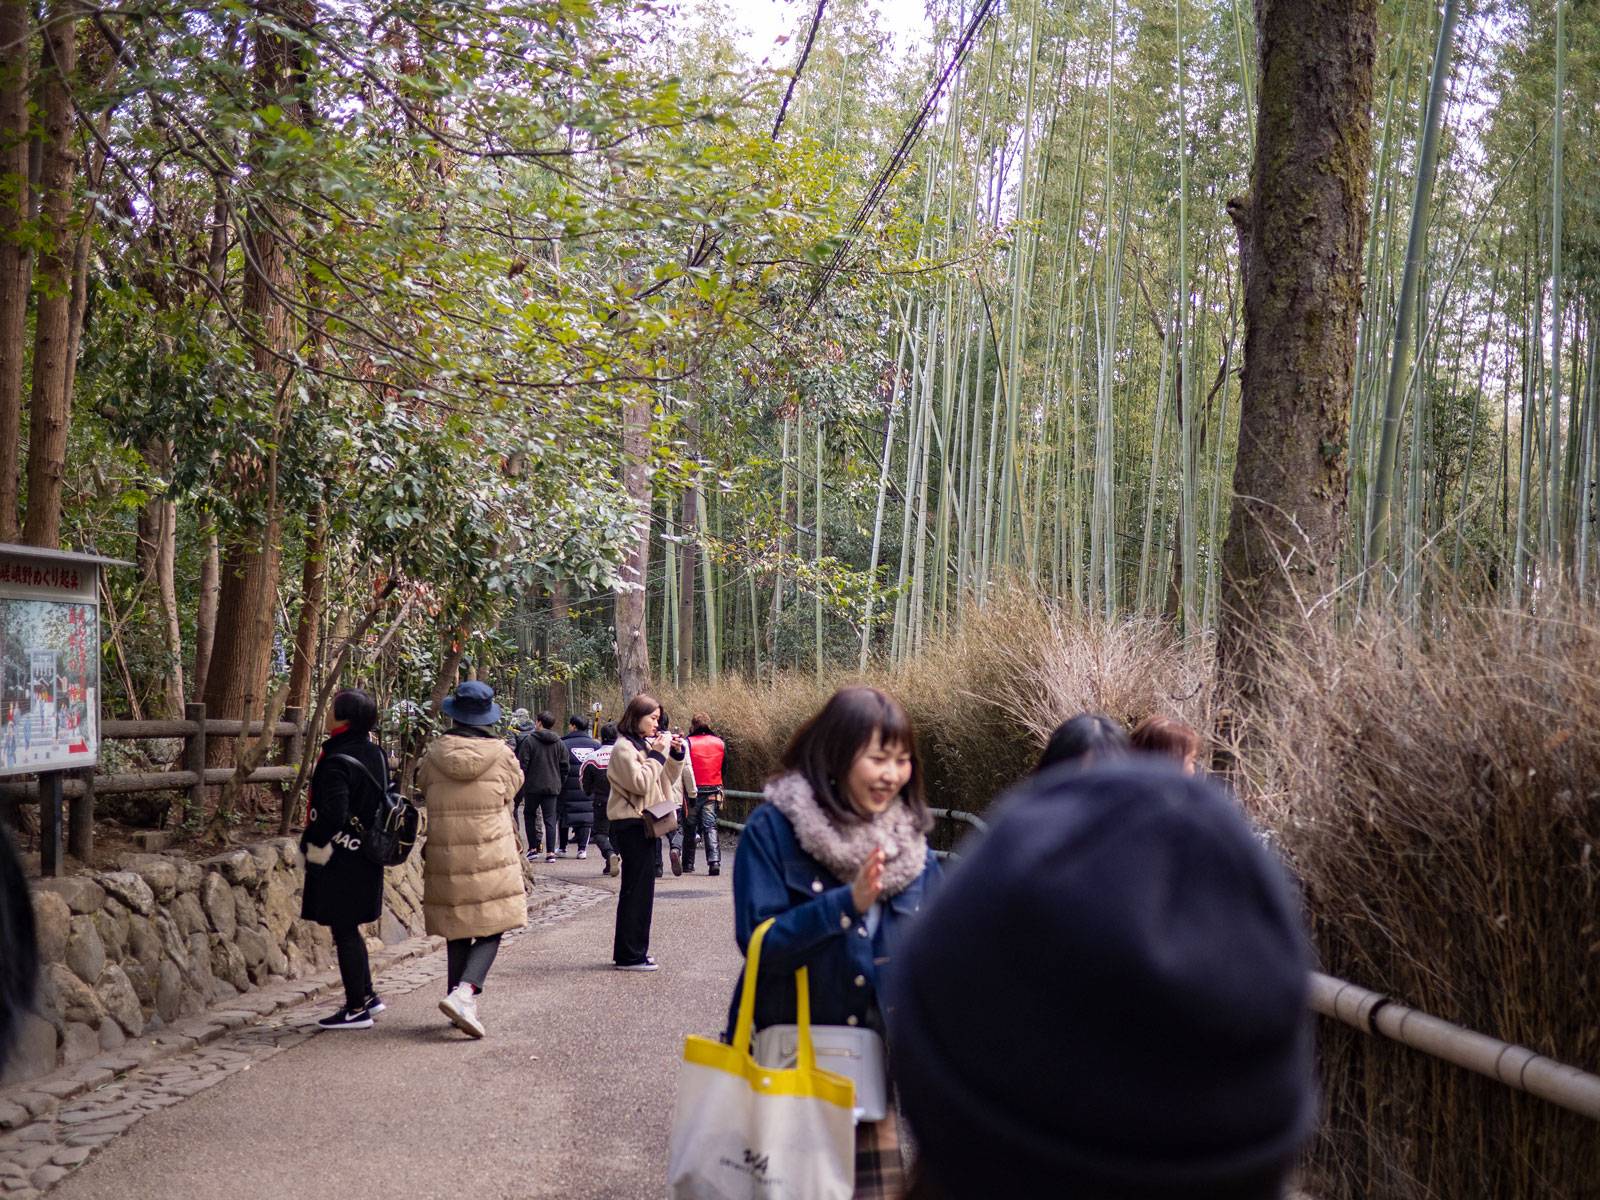 Reaching the bottom of the bamboo grove